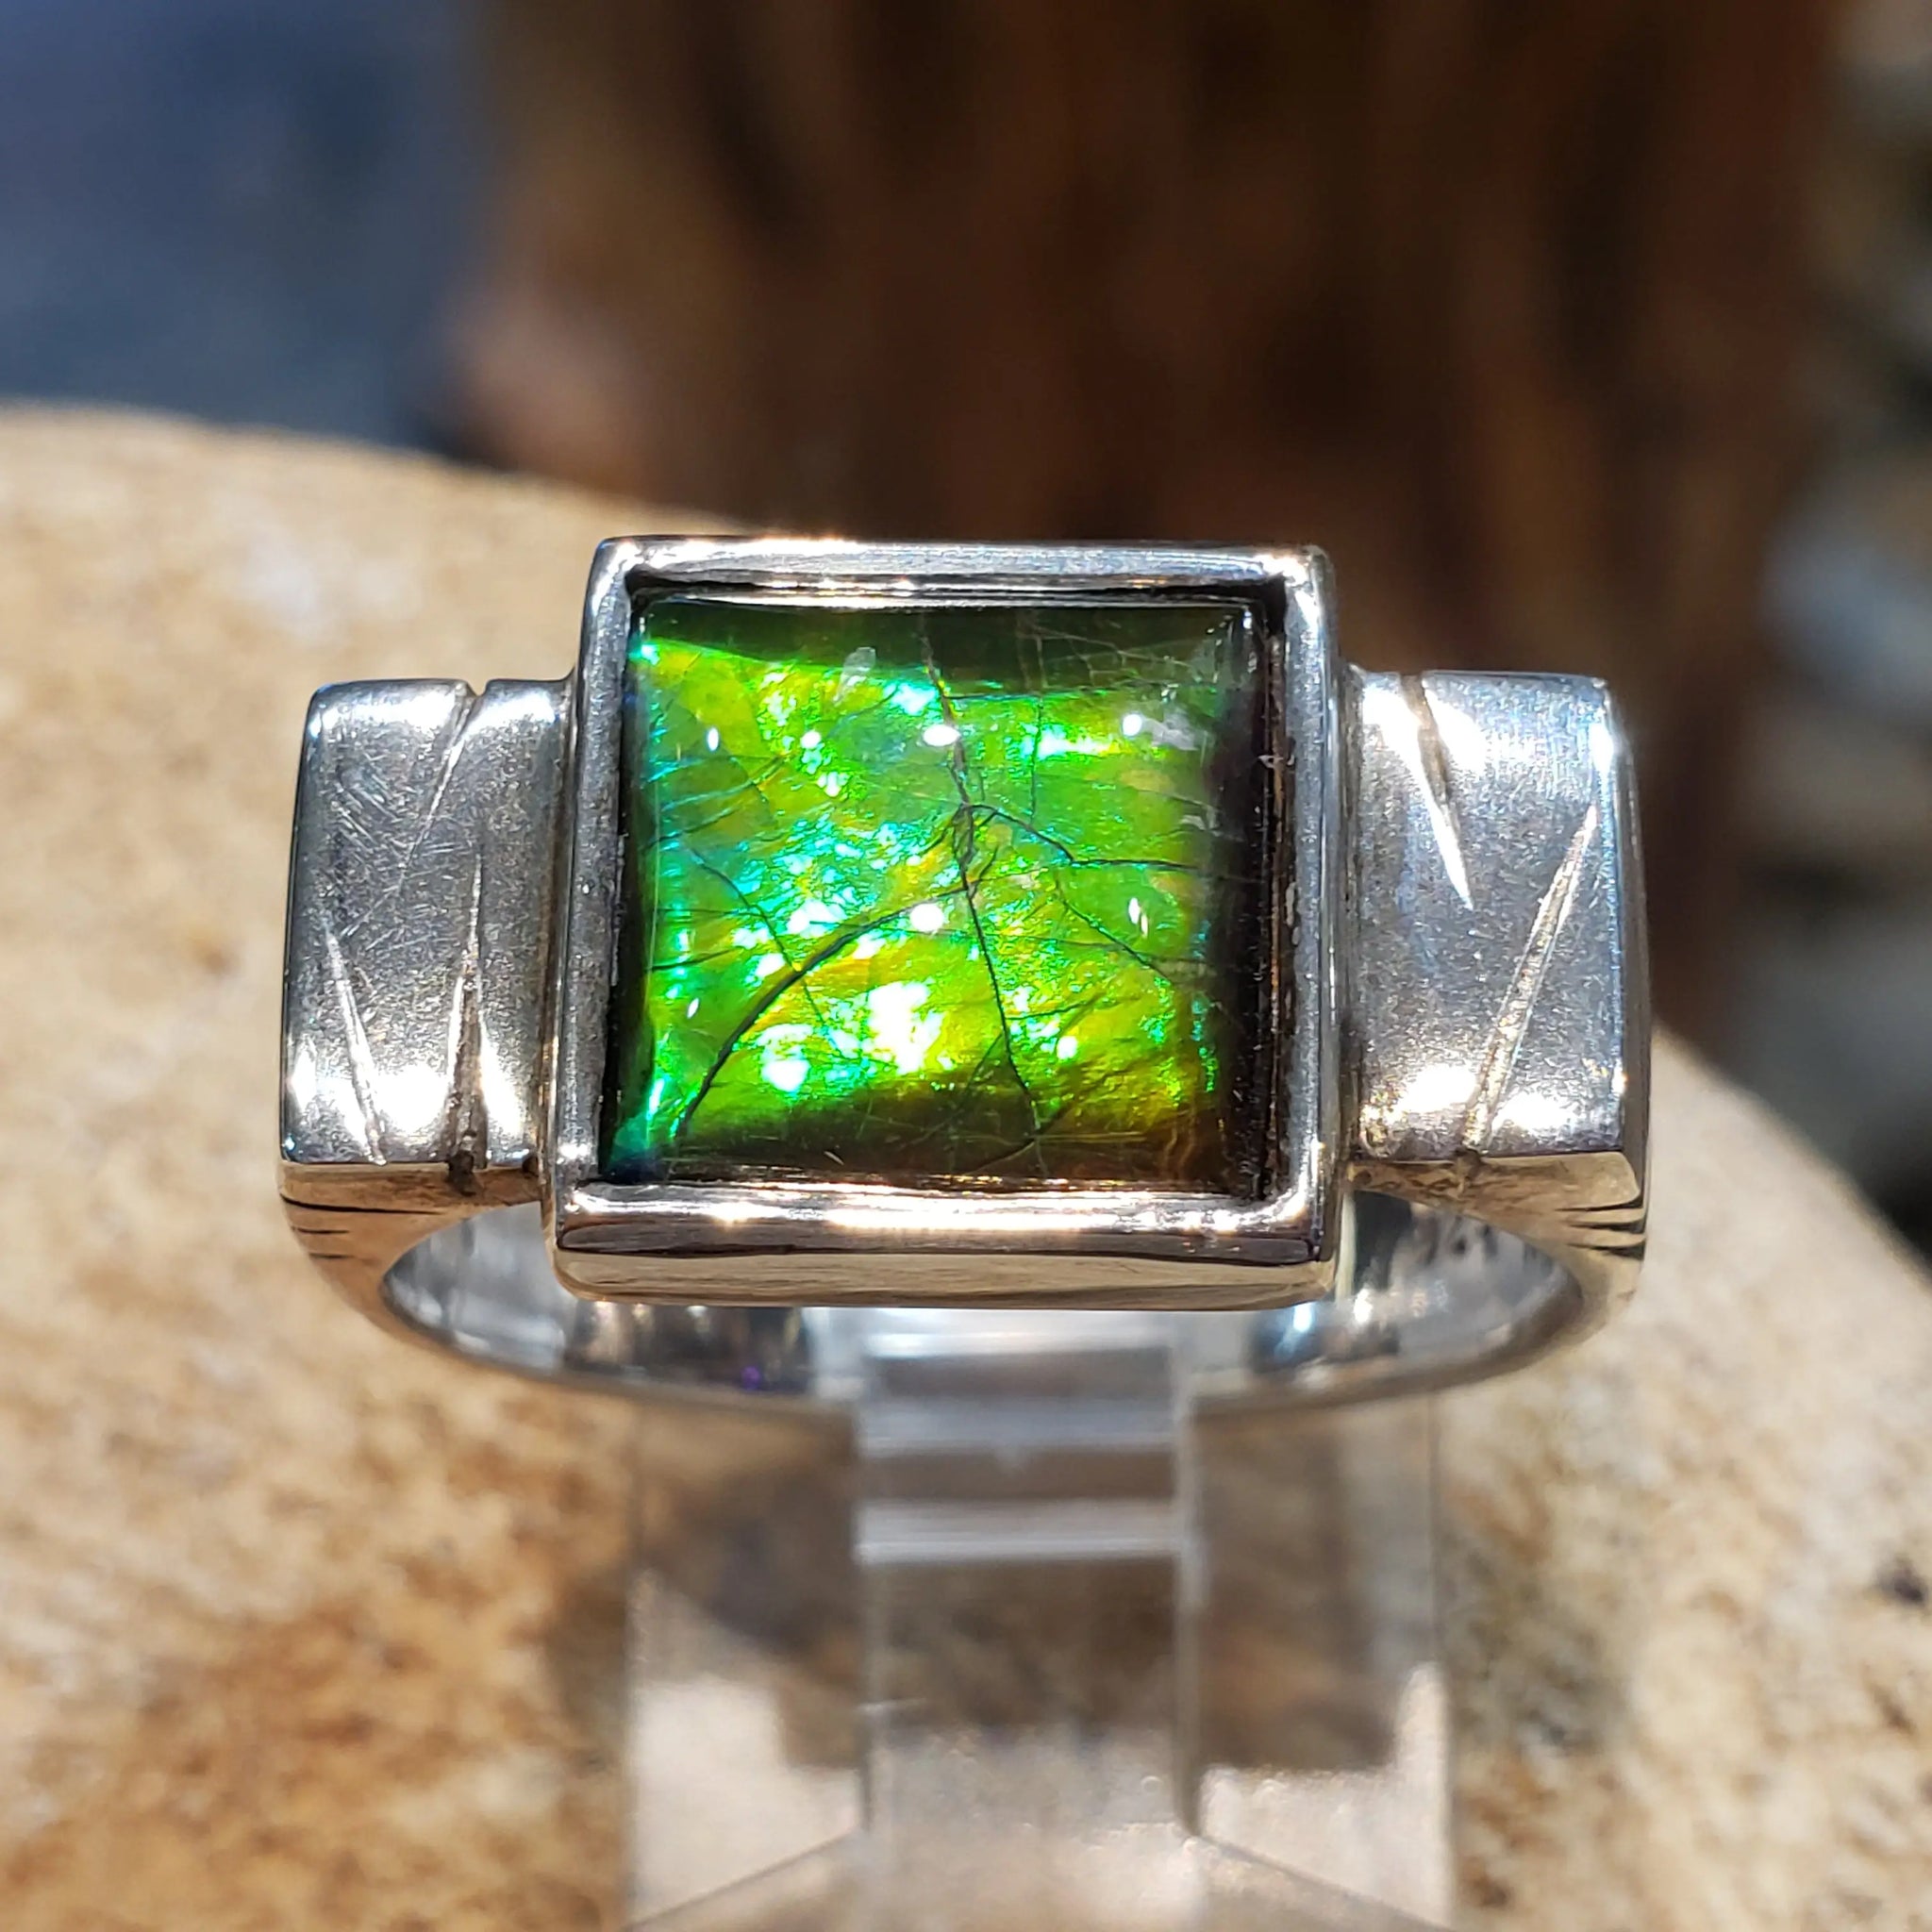 Canadian Ammolite "EverGreen" Series Silver Ring. PN. E20682  Size 9 %product from Empire Ammolite